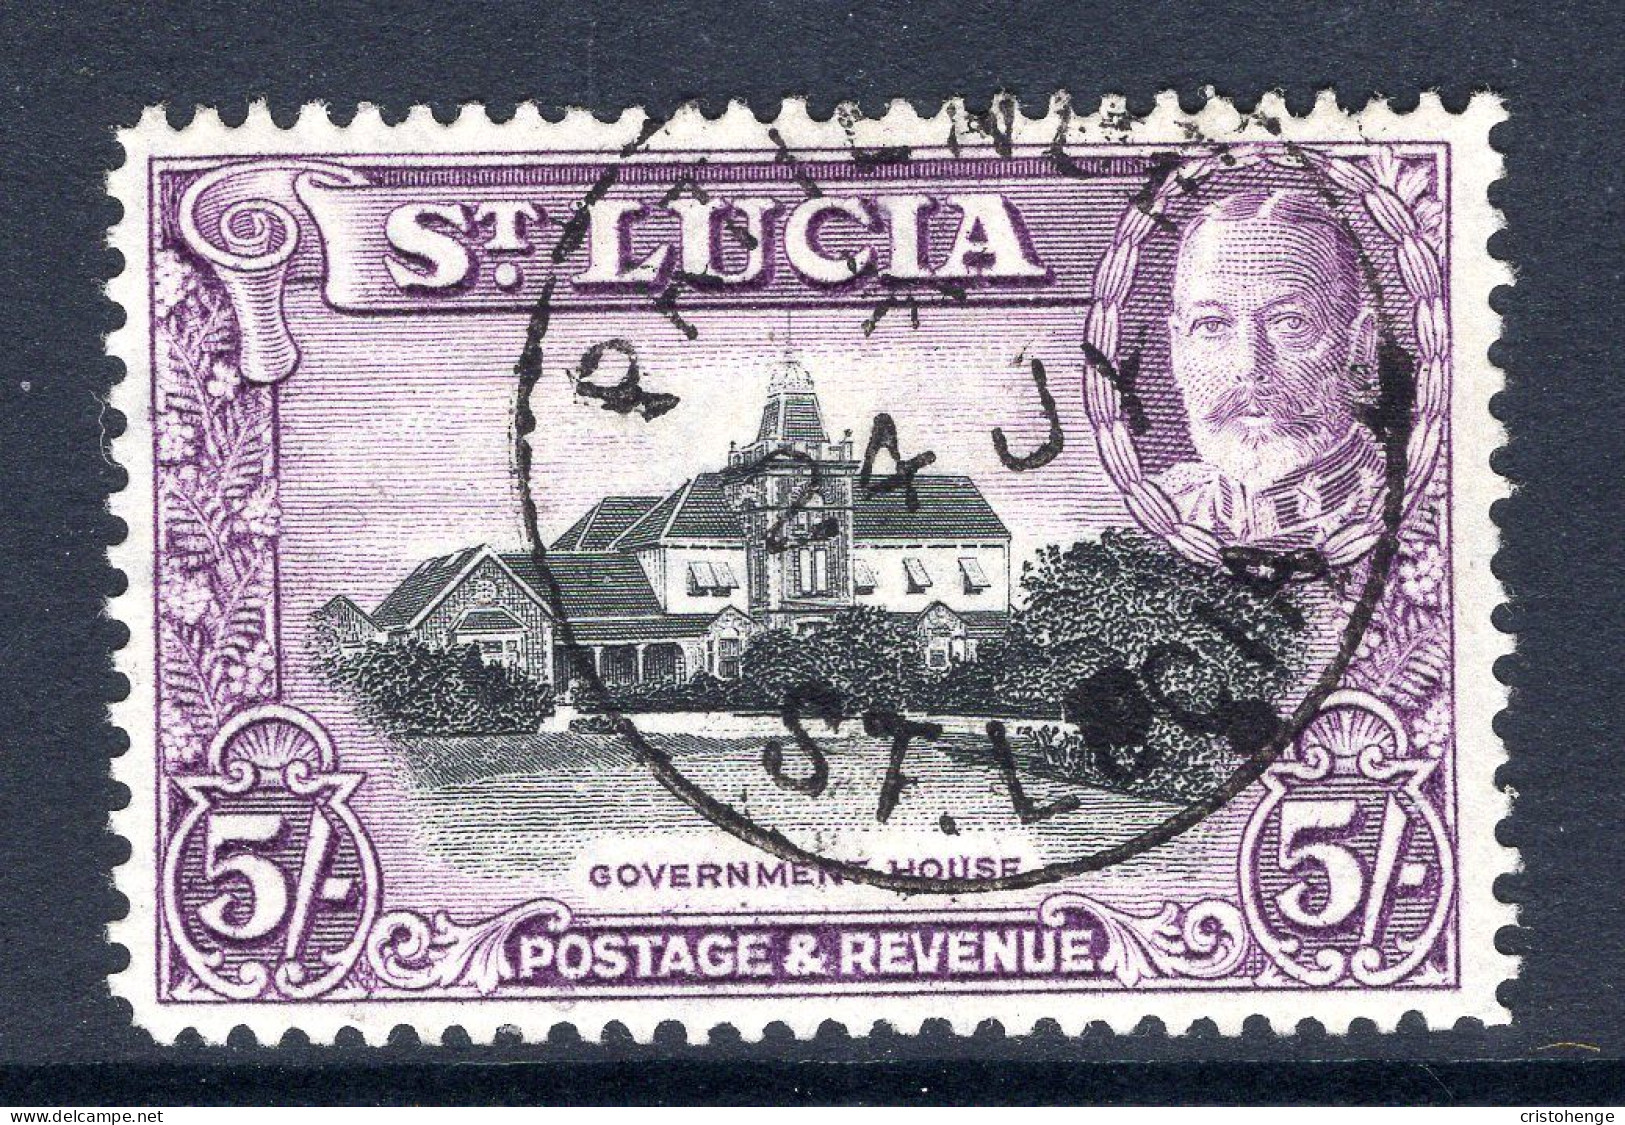 St Lucia 1936 KGV Pictorials - P.14 - 5/- Government House Used (SG 123) - St.Lucia (...-1978)